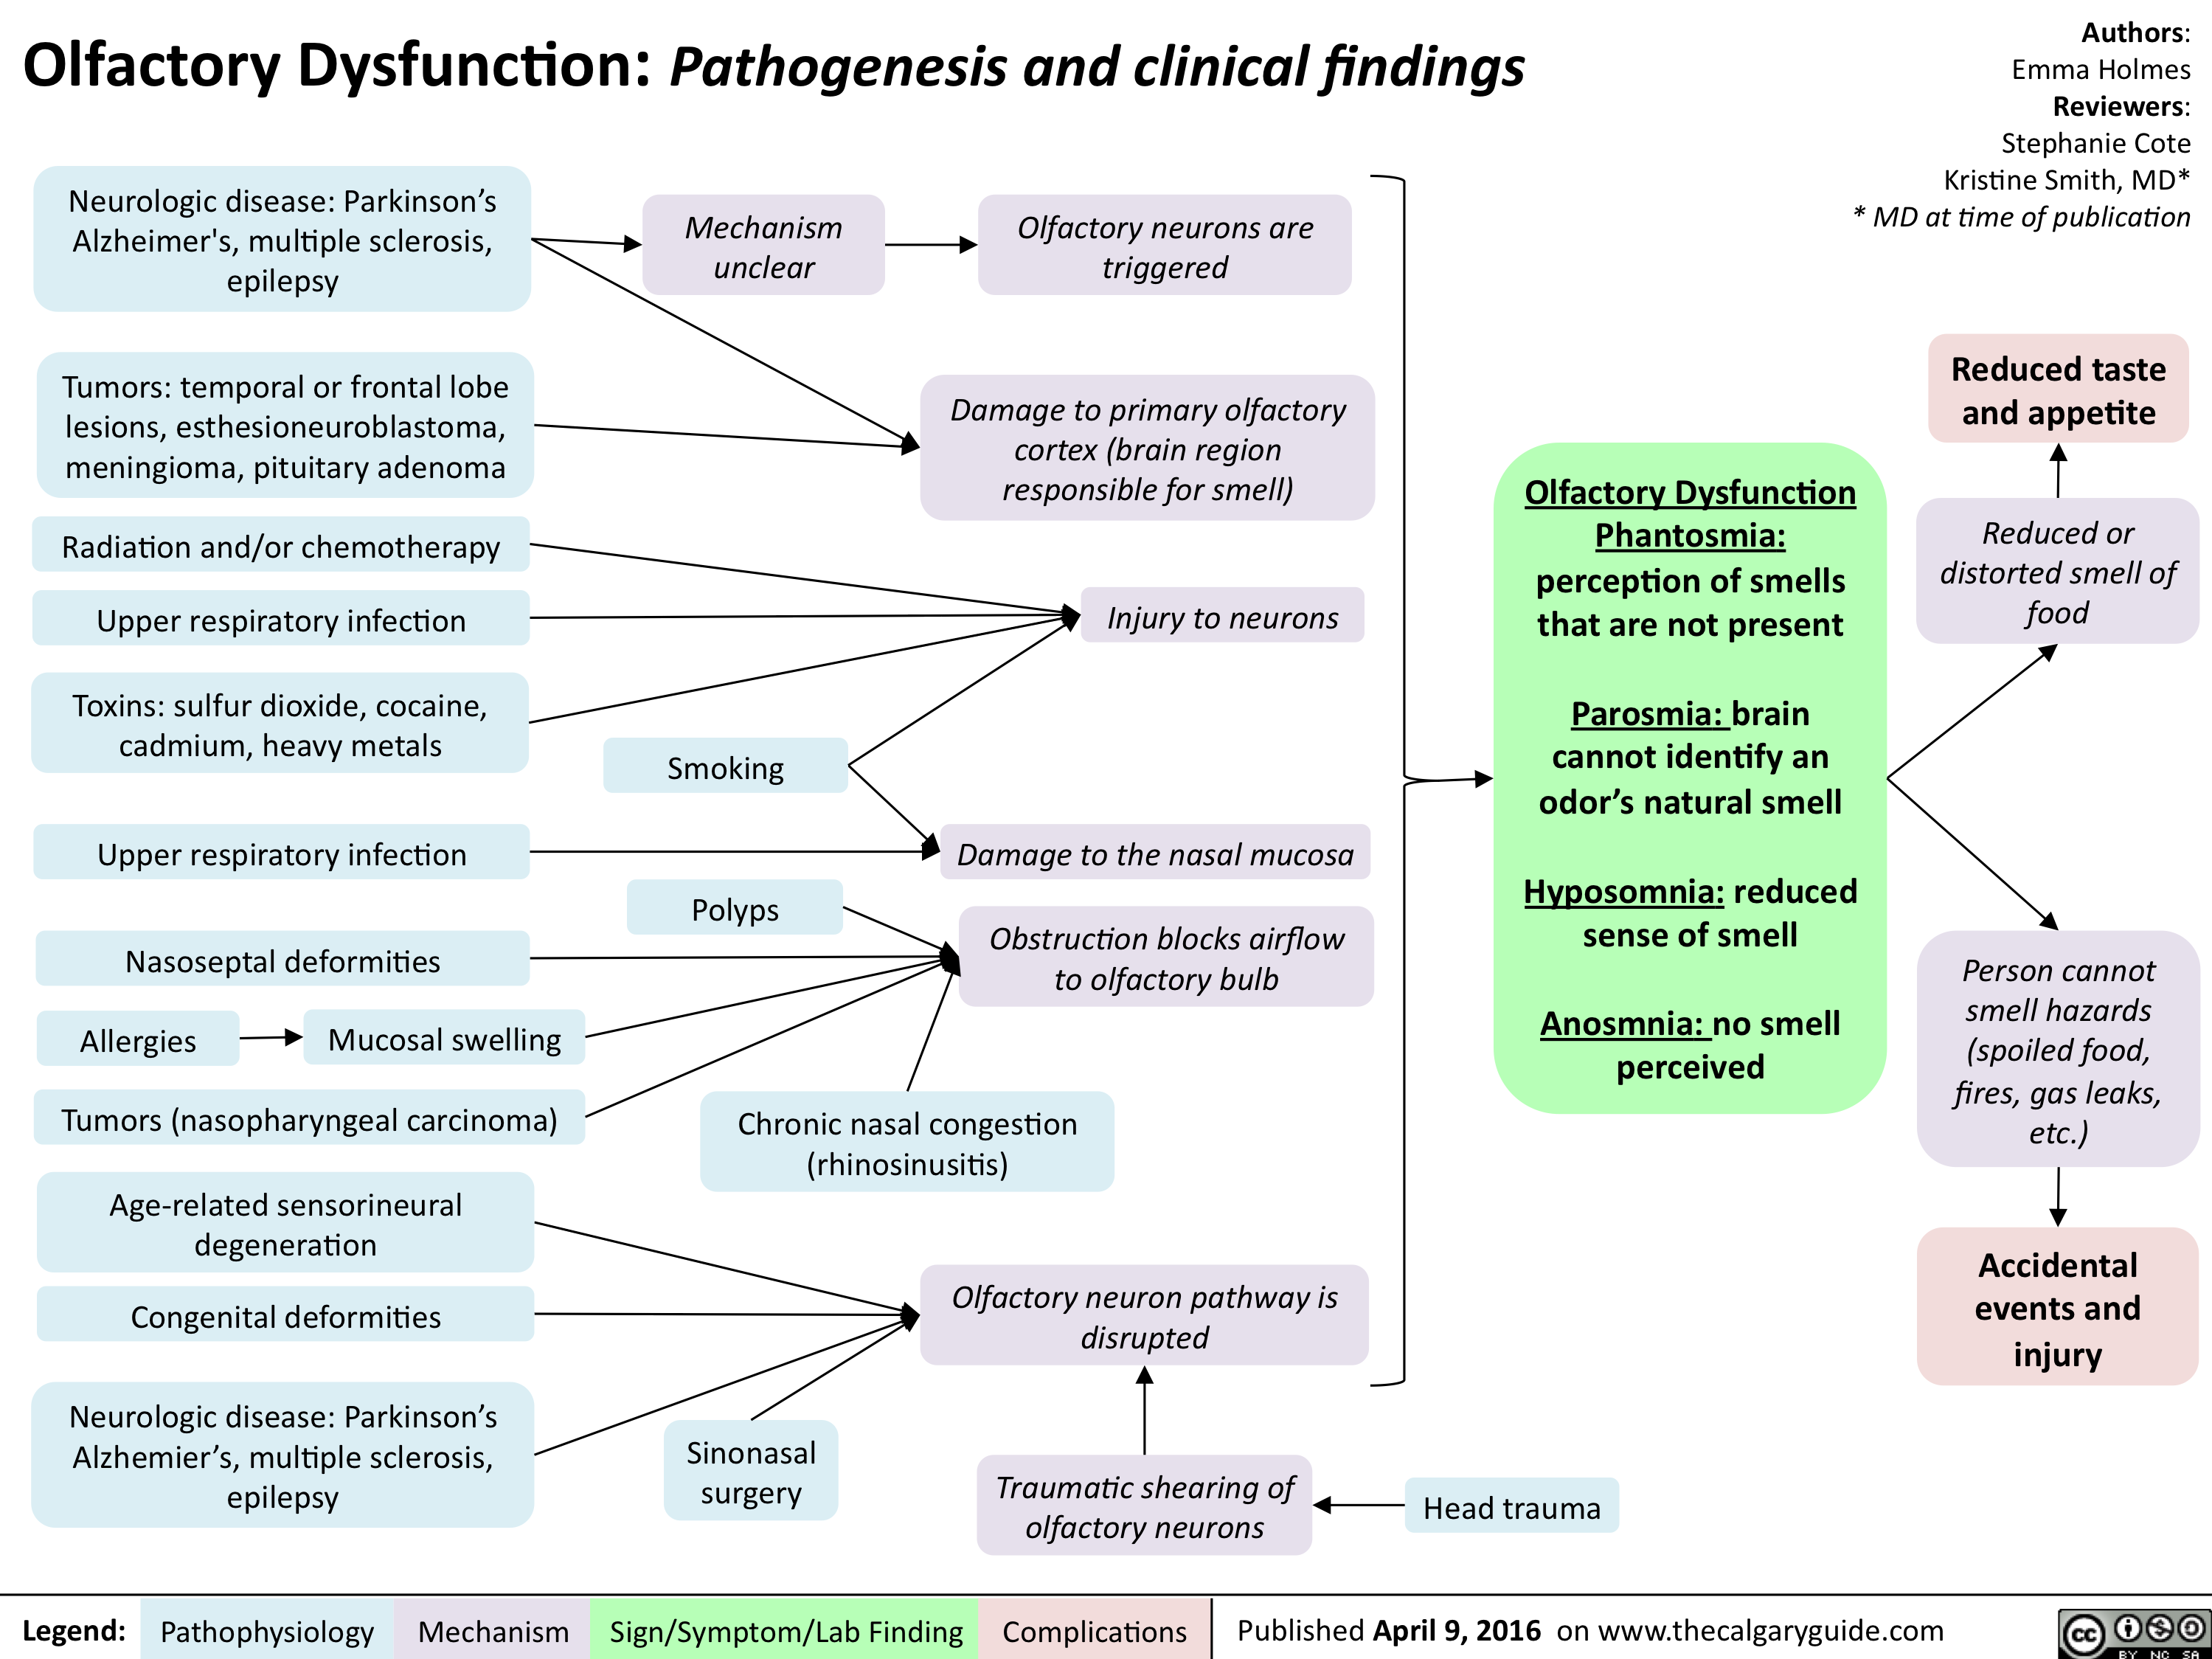 Olfactory Dysfunction - Pathogenesis and clinical findings